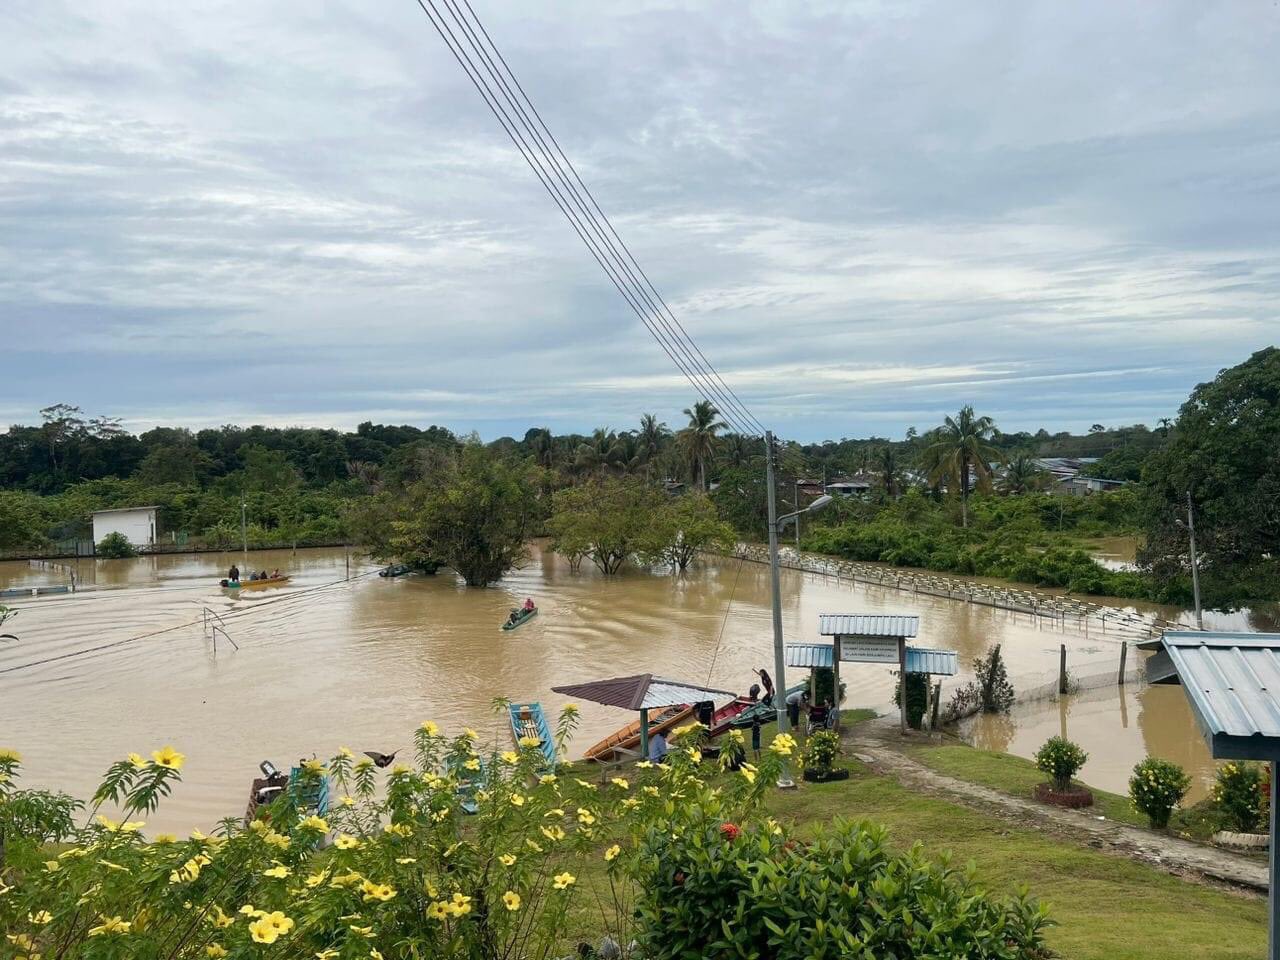 The Baram district was affected by flash floods recently. Image credit: Samudera.my